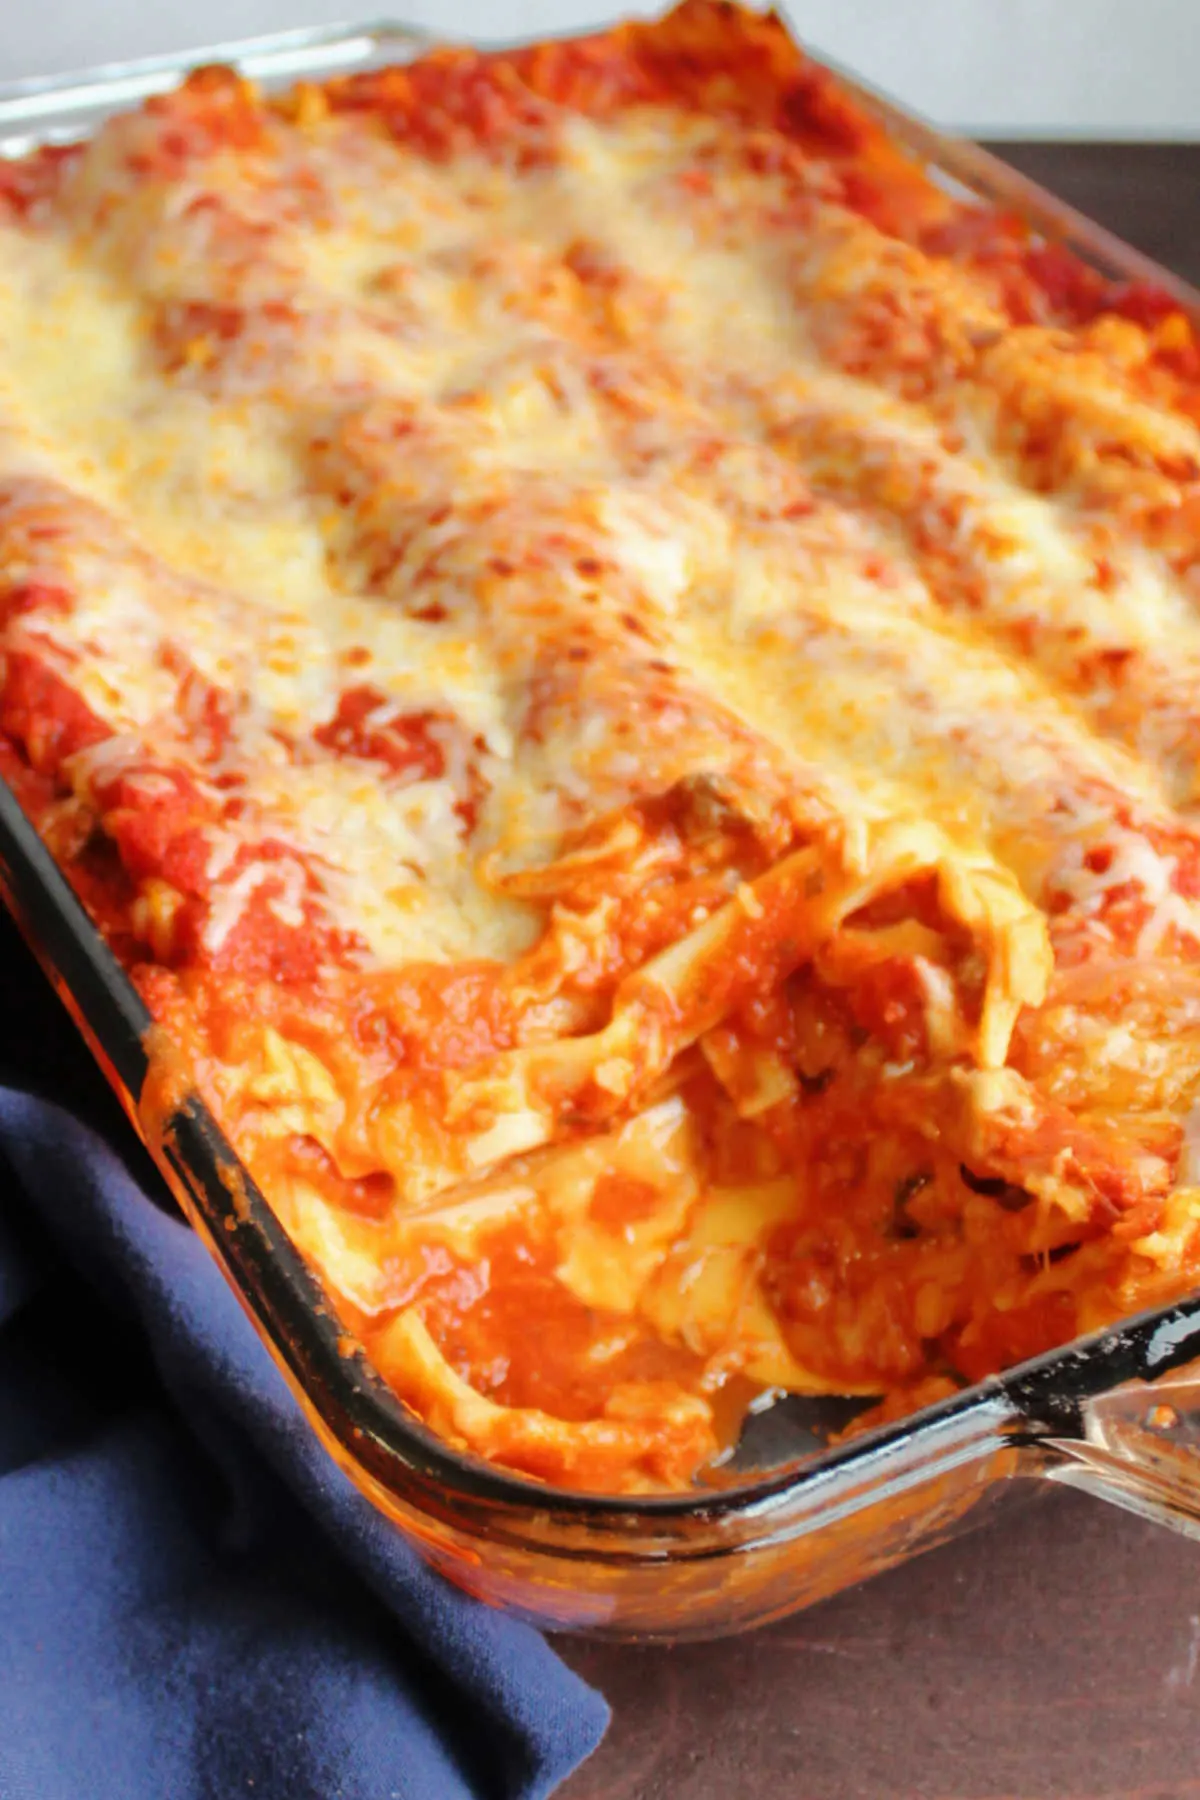 Pan of lasagna with layers of cheese, pasta and sauce with piece missing showing gooey velveeta in the middle.